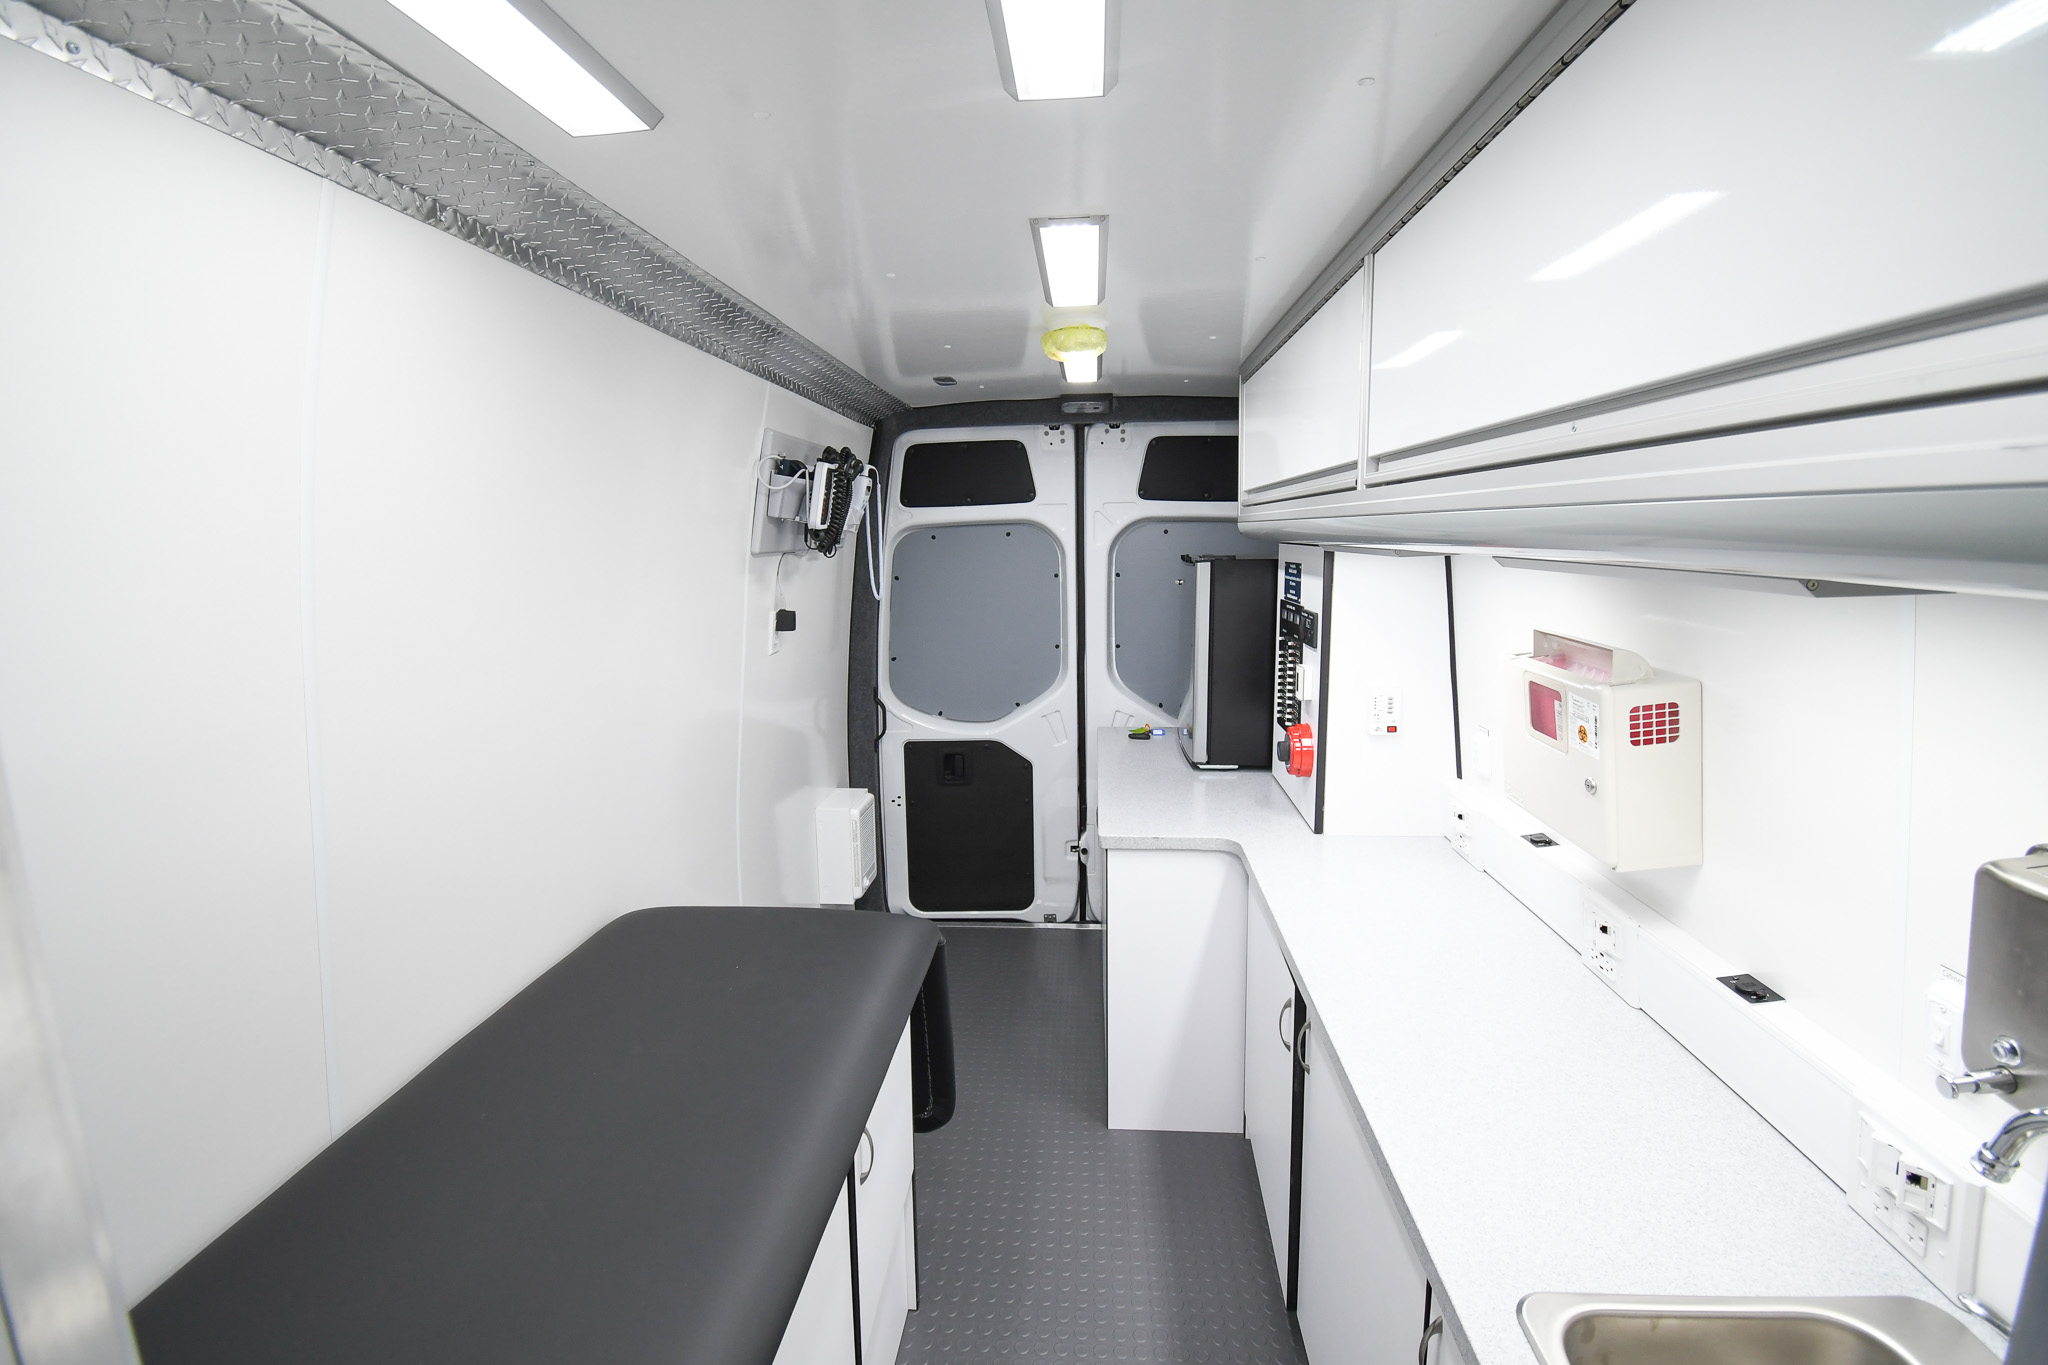 A front-to-back view inside the unit for Greene County, NY.